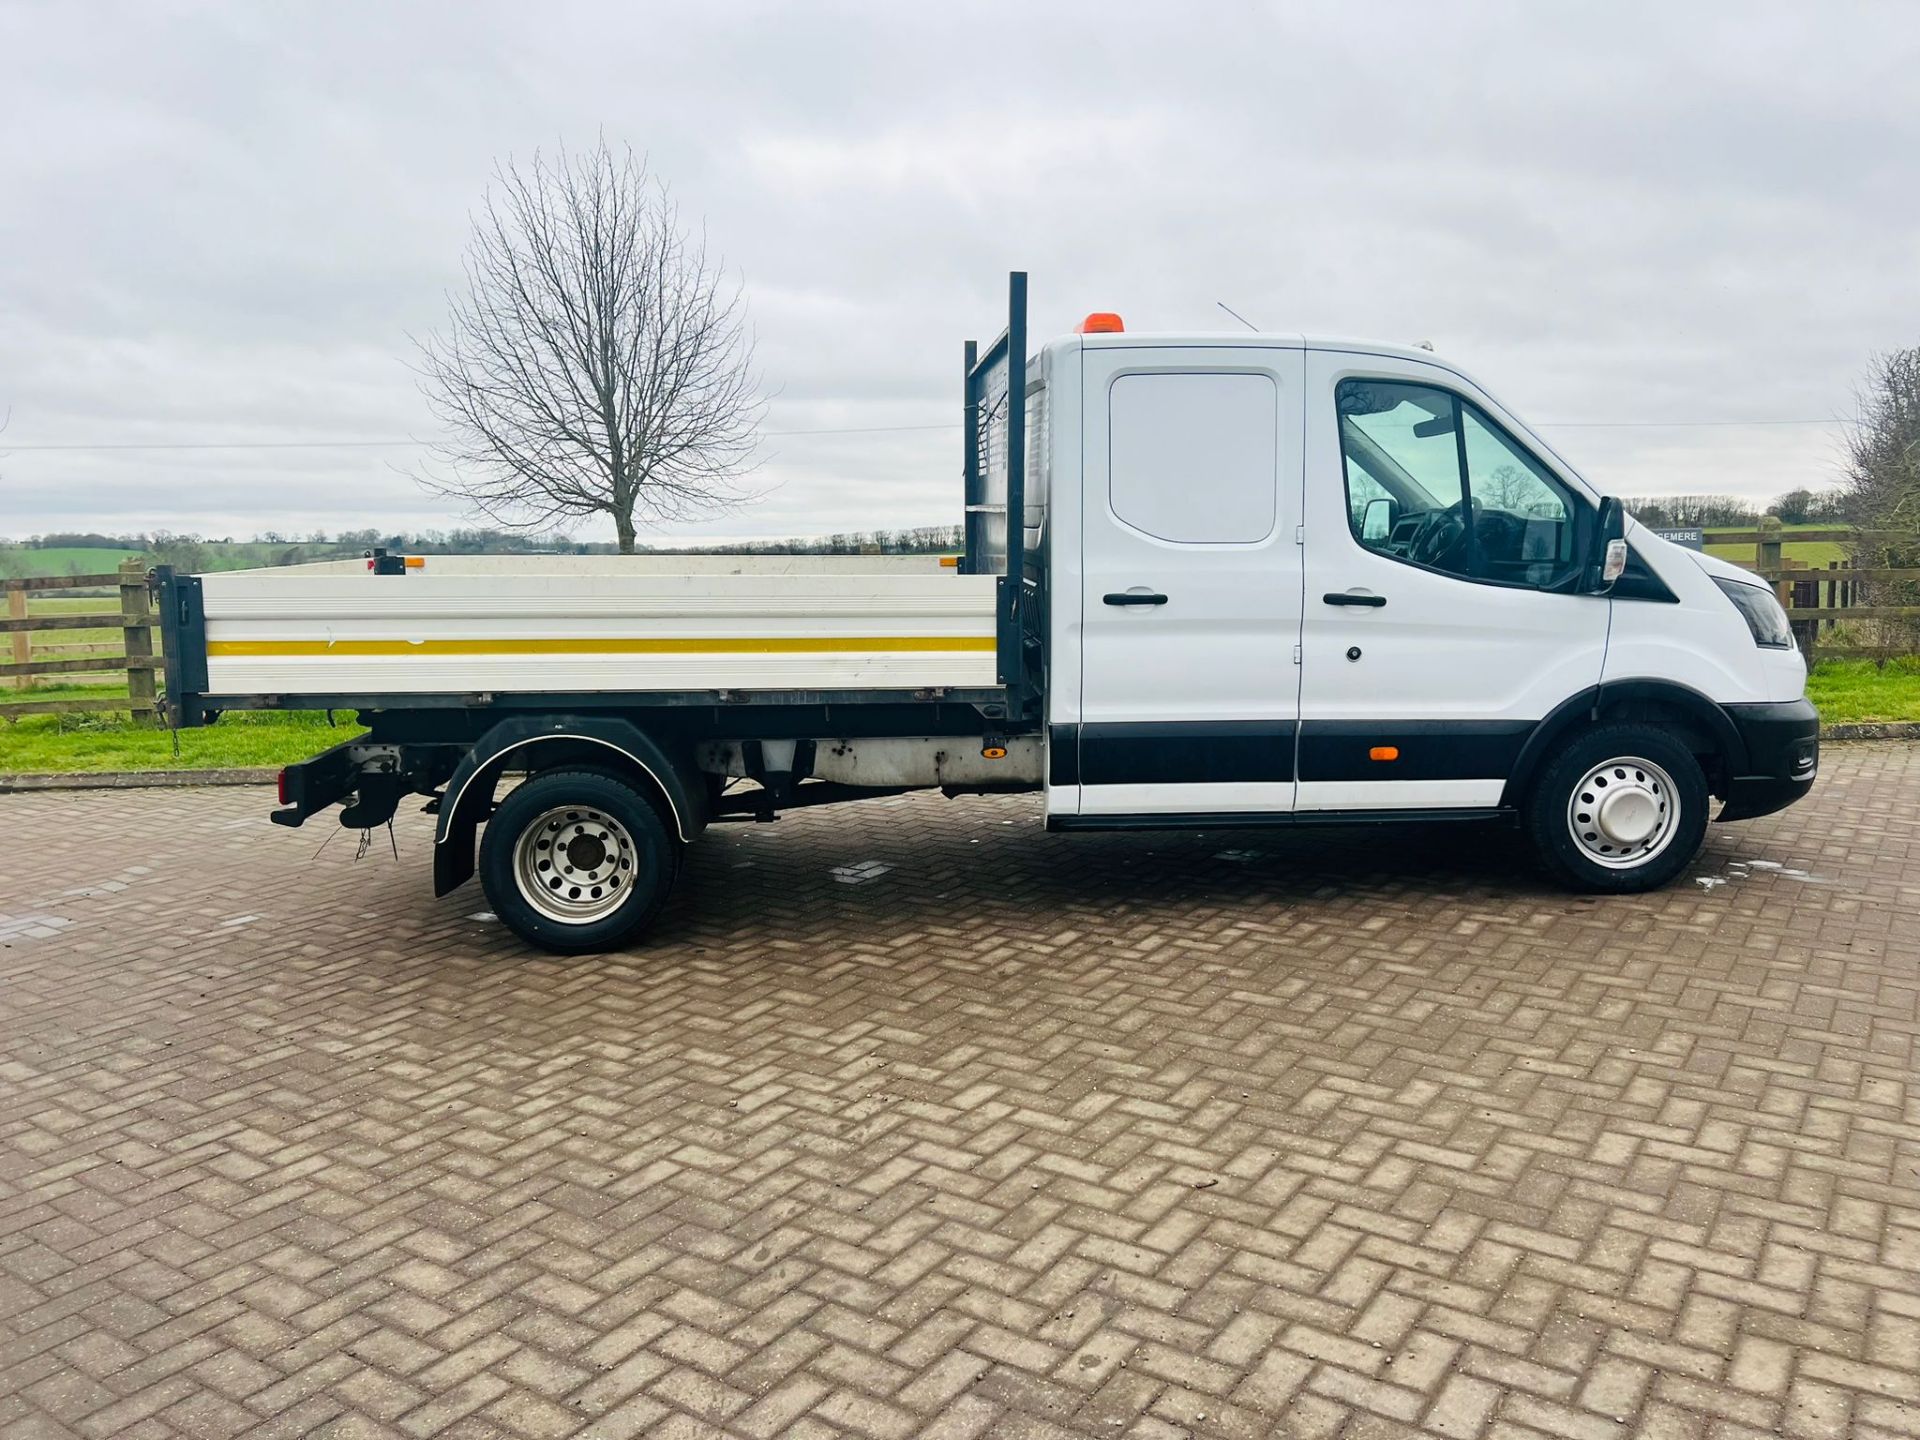 Ford Transit 350 L3 H1 2.0 TDCI Double Cab Tipper 2020 Year - Euro 6 - 1 Owner-SH Print - 57K Only - Image 8 of 20